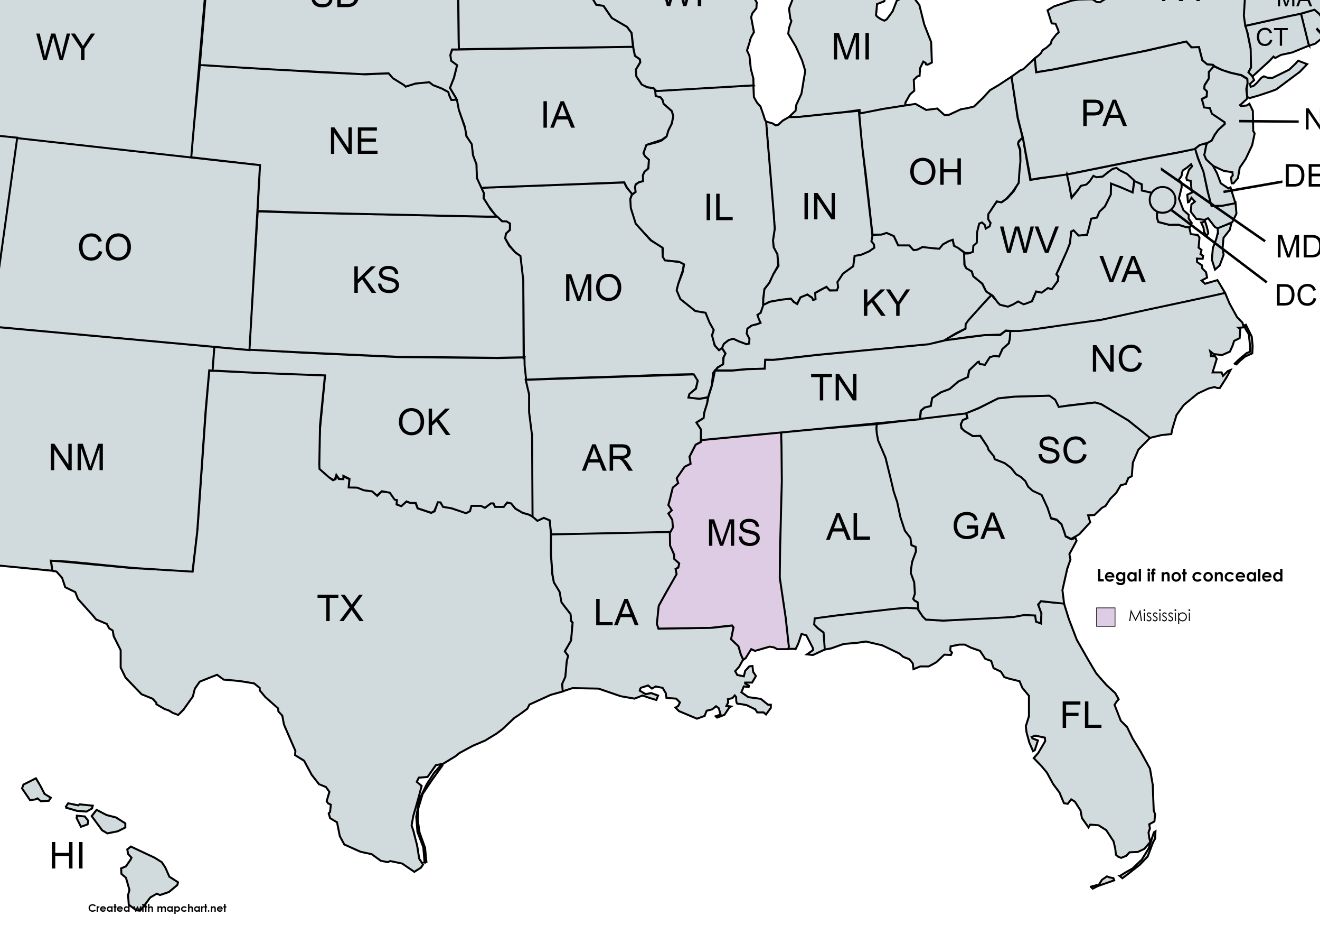 map of states of United states of America highlighting the state in pink having legal if not concealed status in case of lock picking. the state is Mississippi